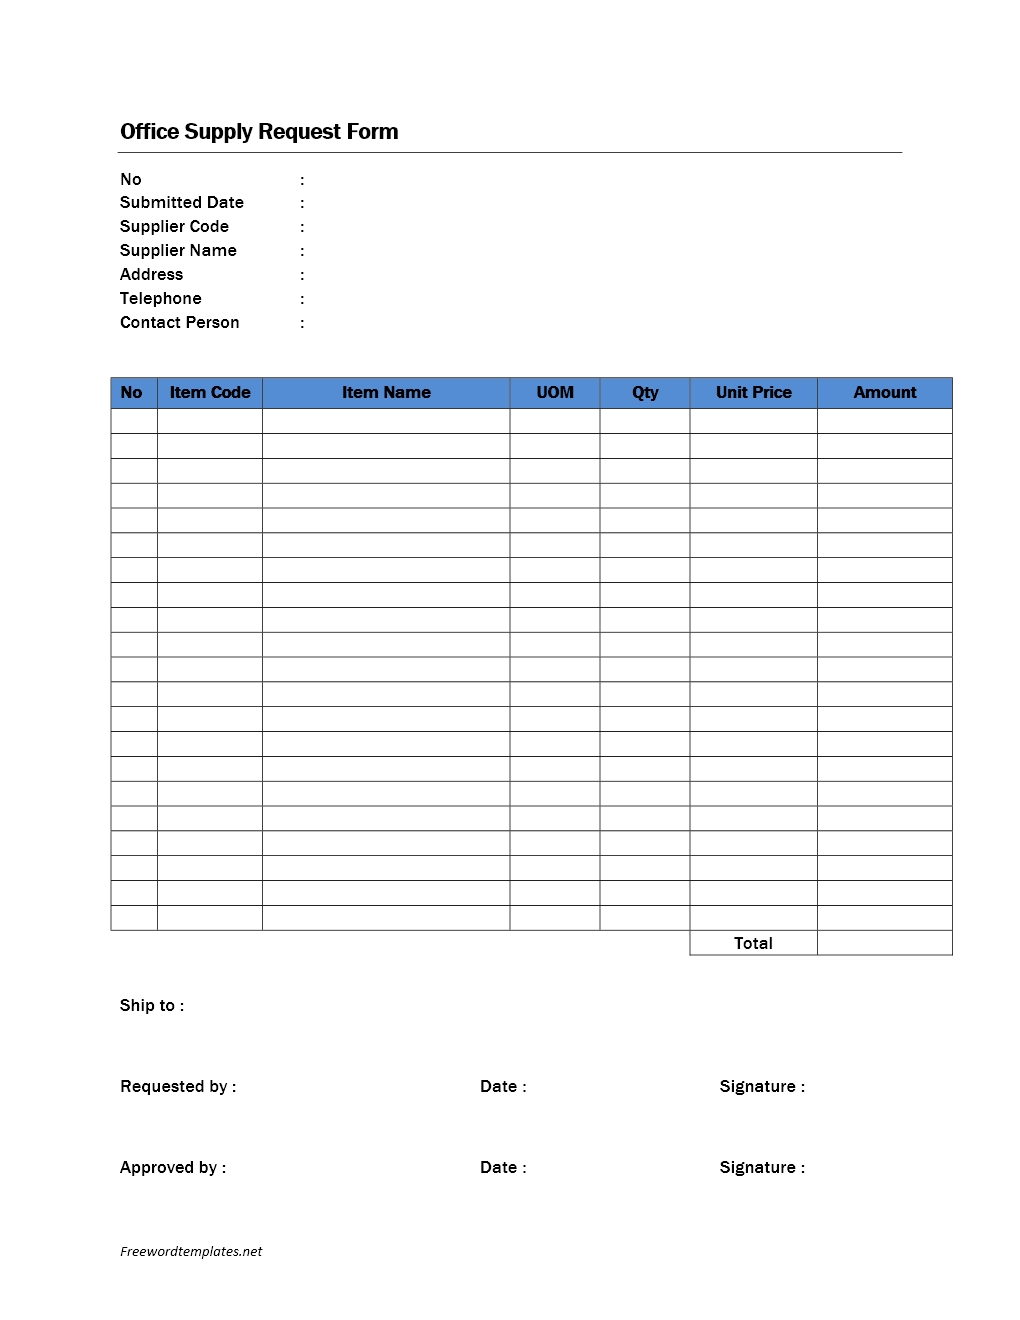 office supply order form   April.onthemarch.co